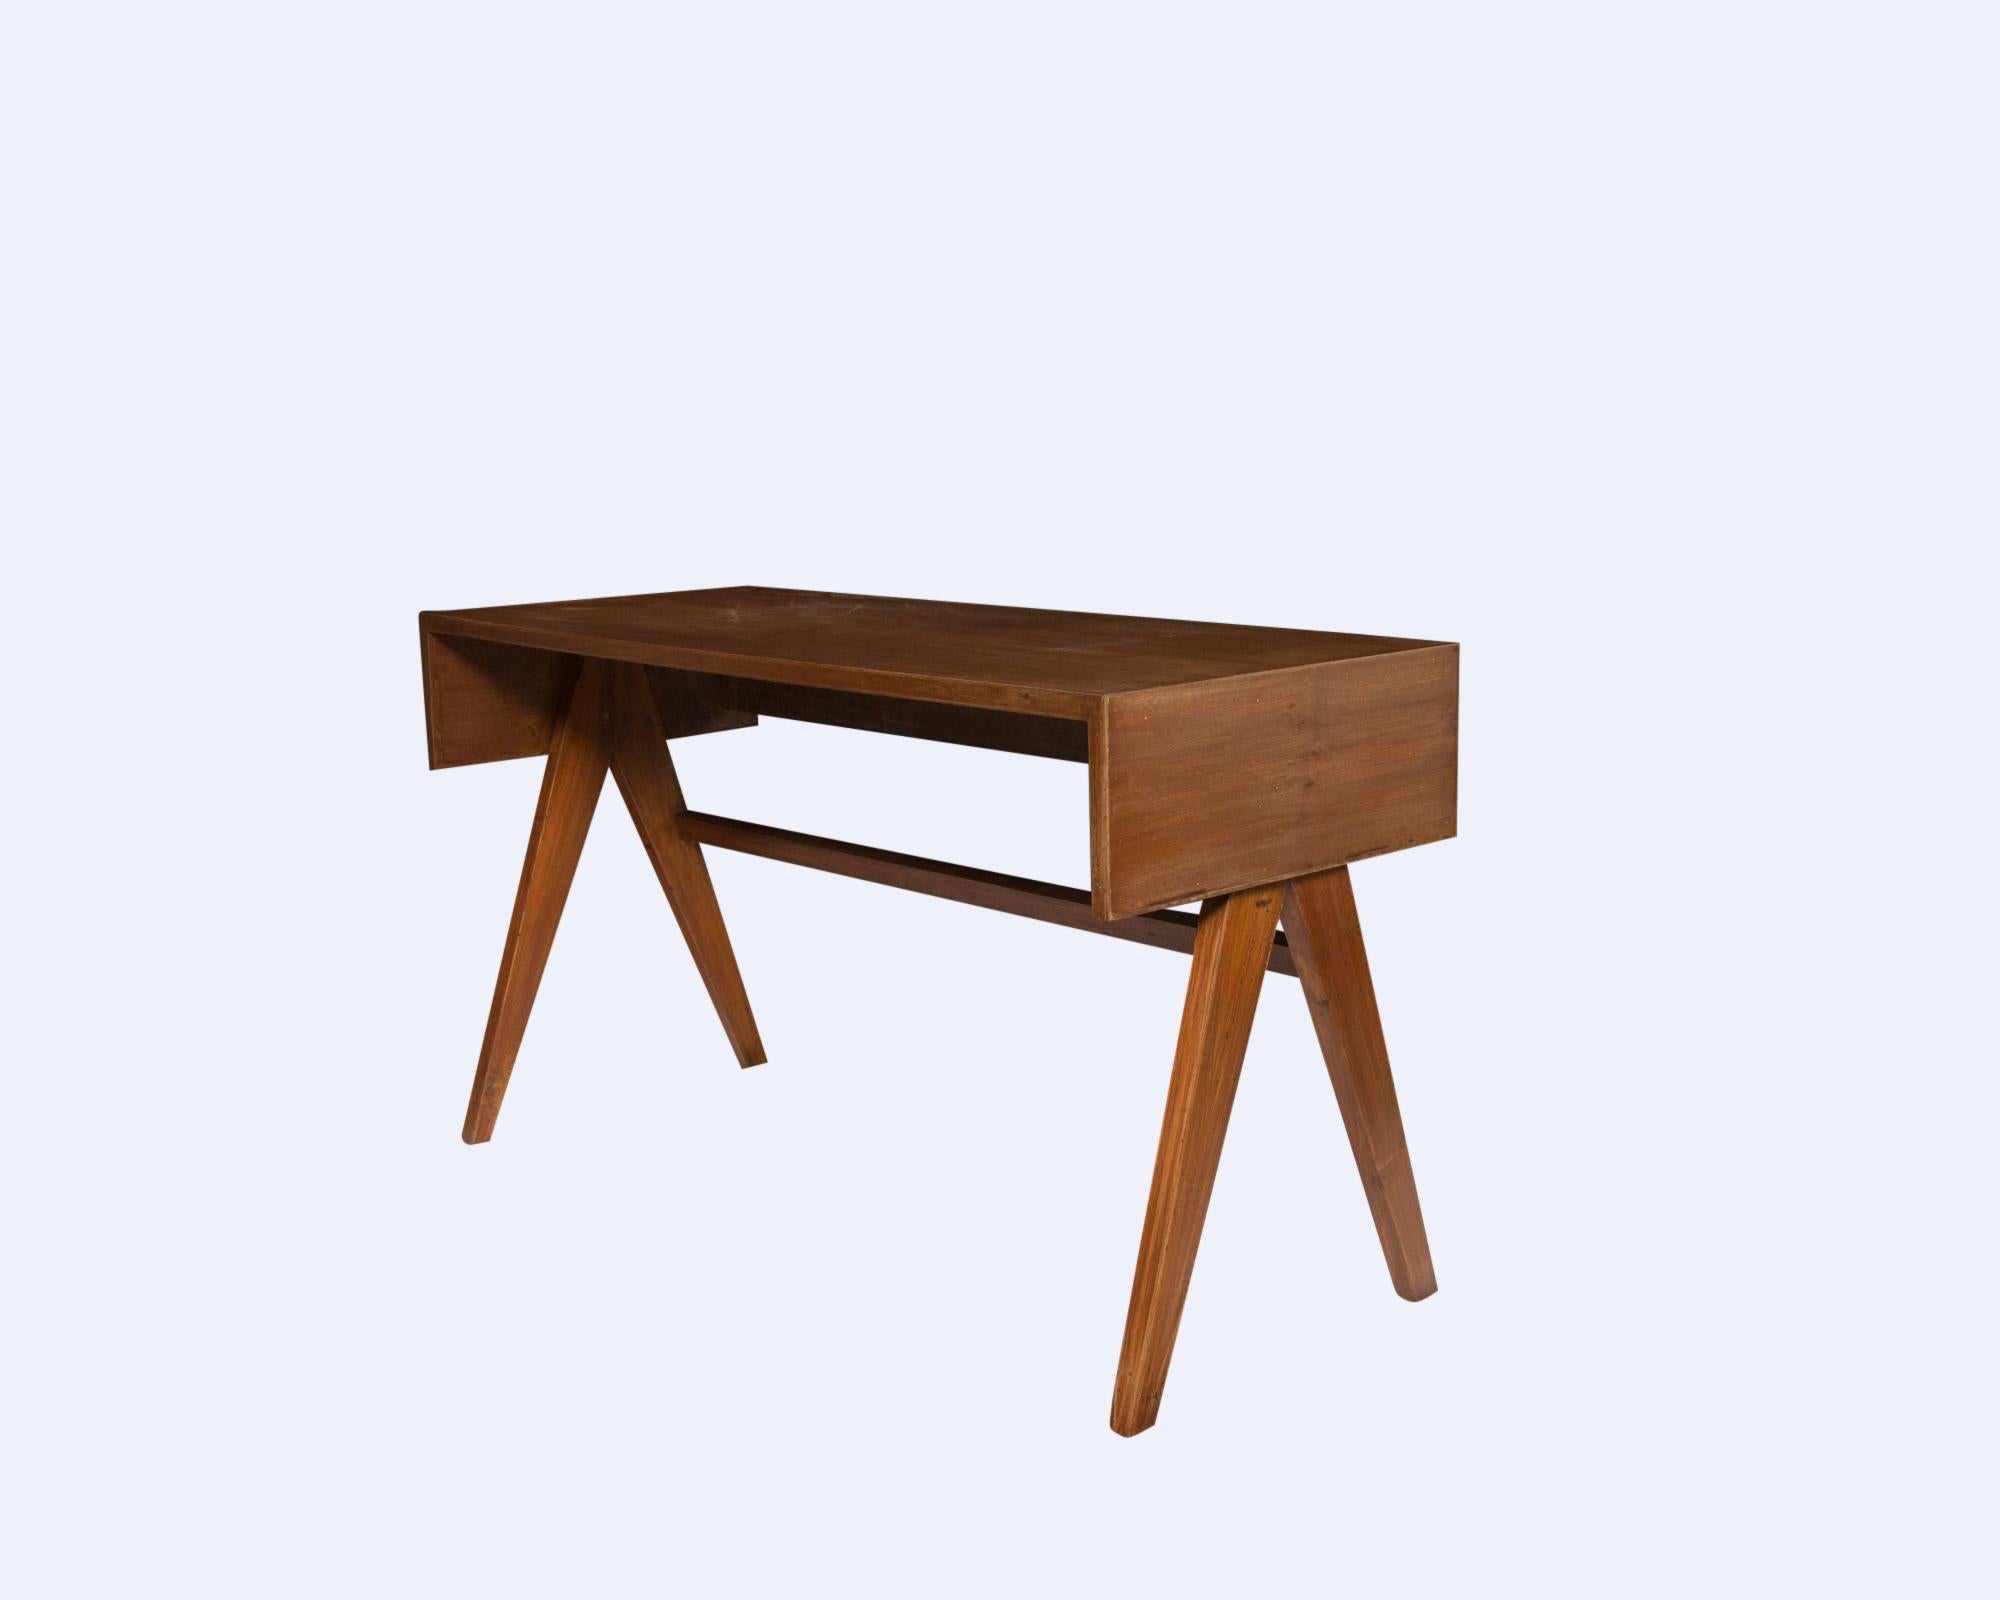 Pierre Jeanneret student desk of solid teak
• Excellent condition for age
• Includes certificate of authenticity, certified by Jacques Dworczak, world-renowned Pierre Jeanneret authenticator and collector, author of the Assouline book 